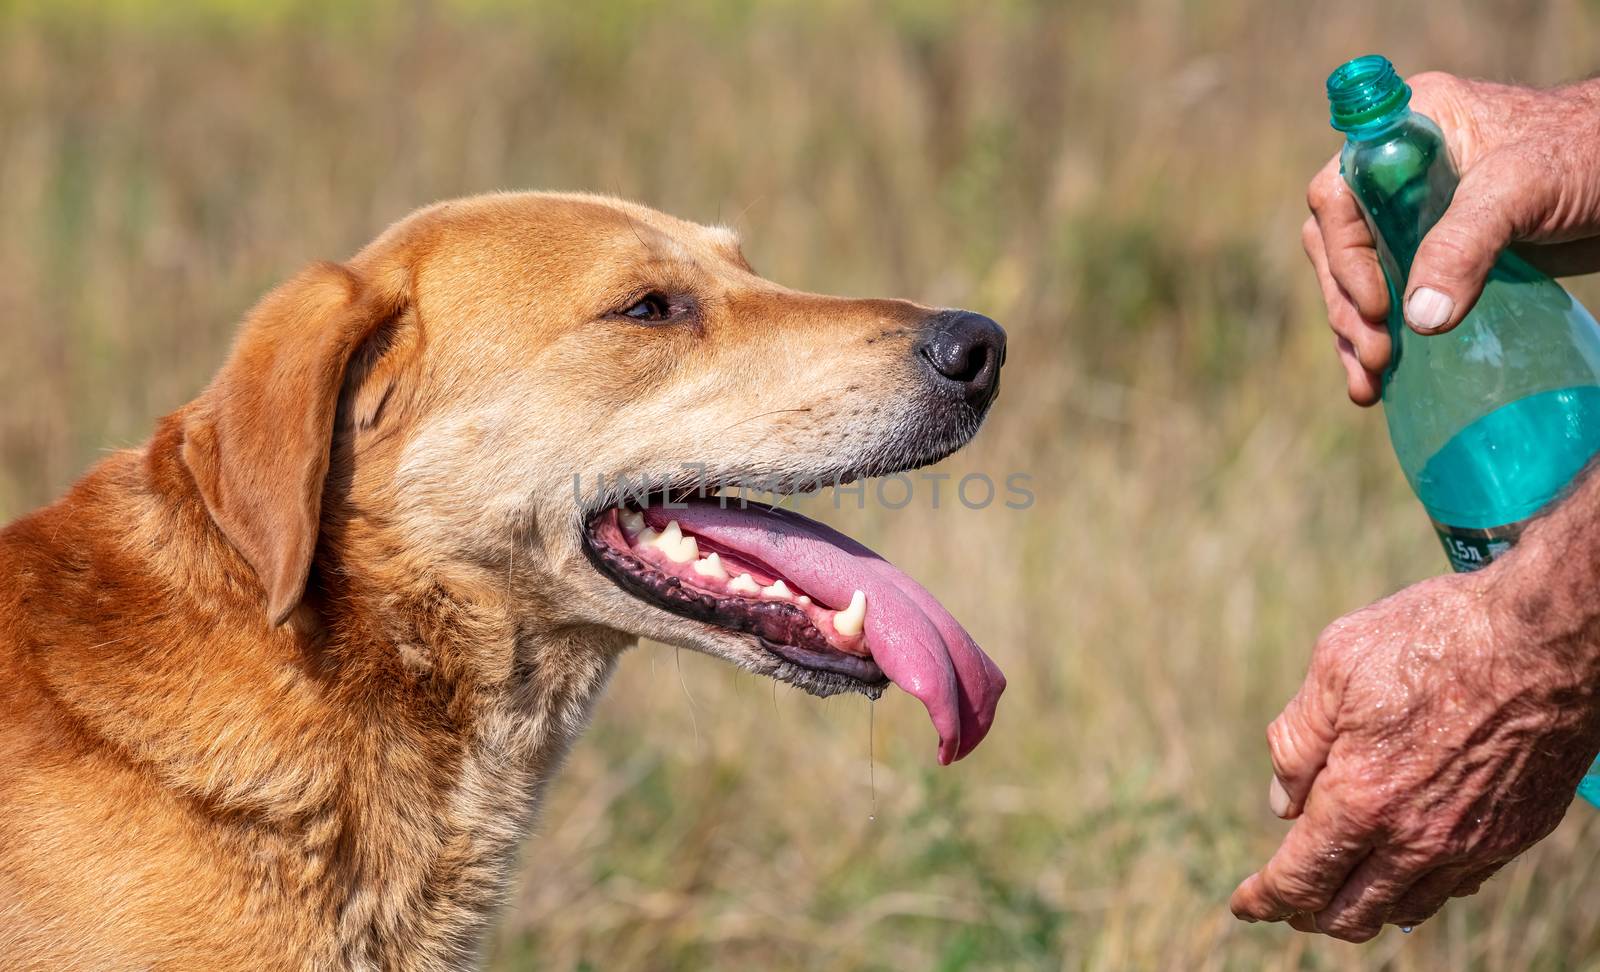 Shot of a hunter who is about to give water to his hound dog in the countryside. Dog looking very happy and content, its mouth wide open, tongue sticking out. Close up view. Blurred background.